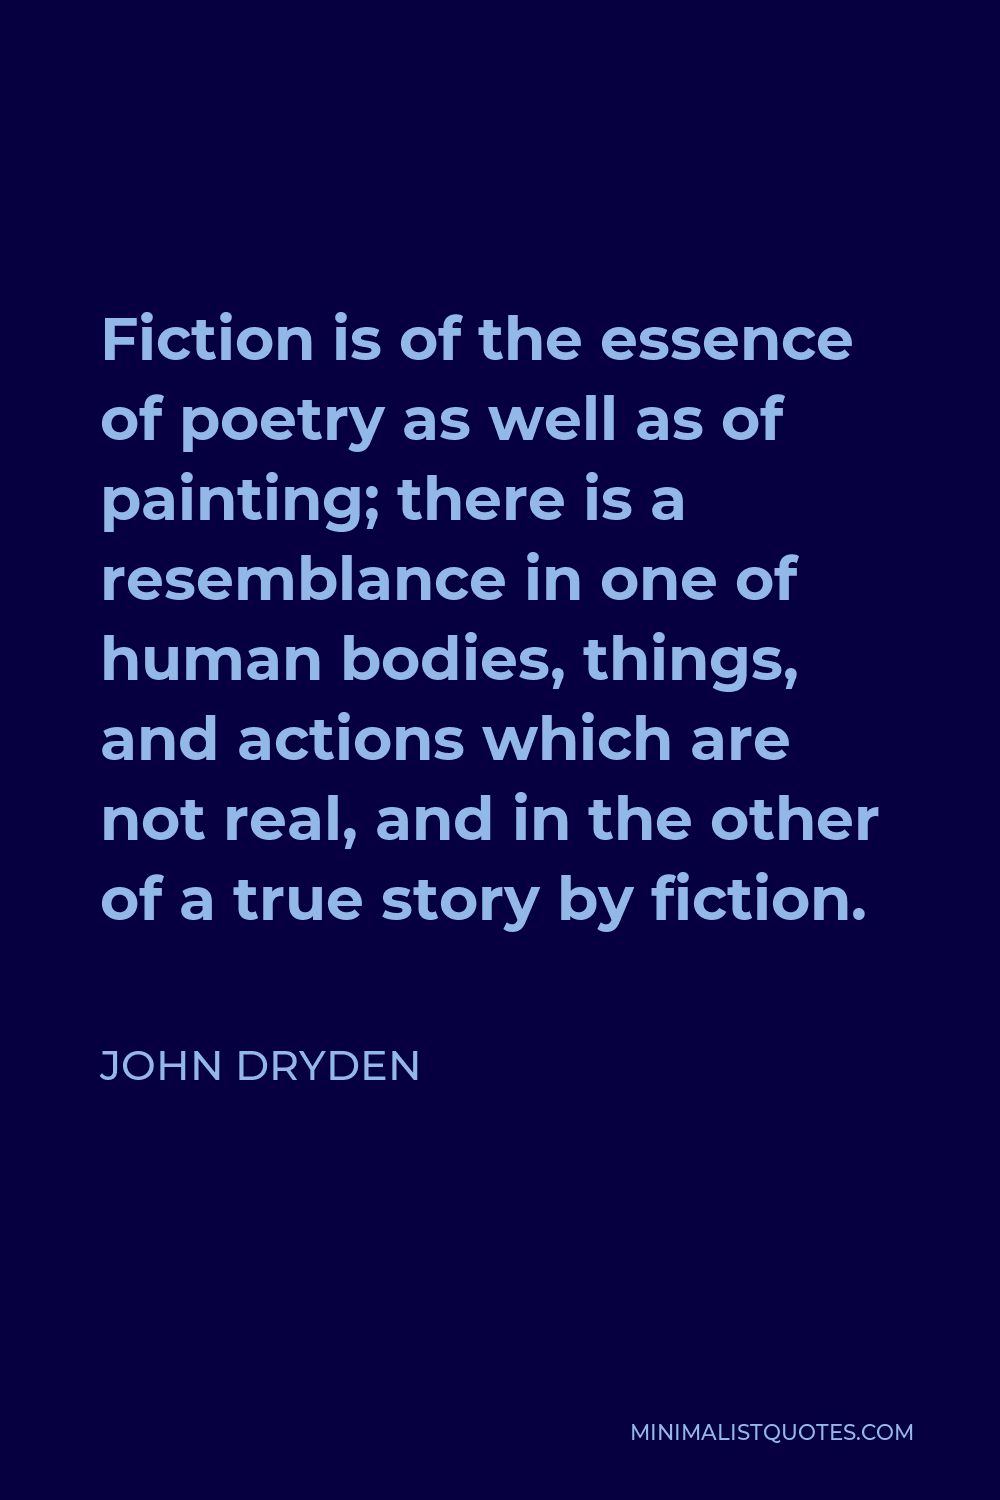 John Dryden Quote - Fiction is of the essence of poetry as well as of painting; there is a resemblance in one of human bodies, things, and actions which are not real, and in the other of a true story by fiction.